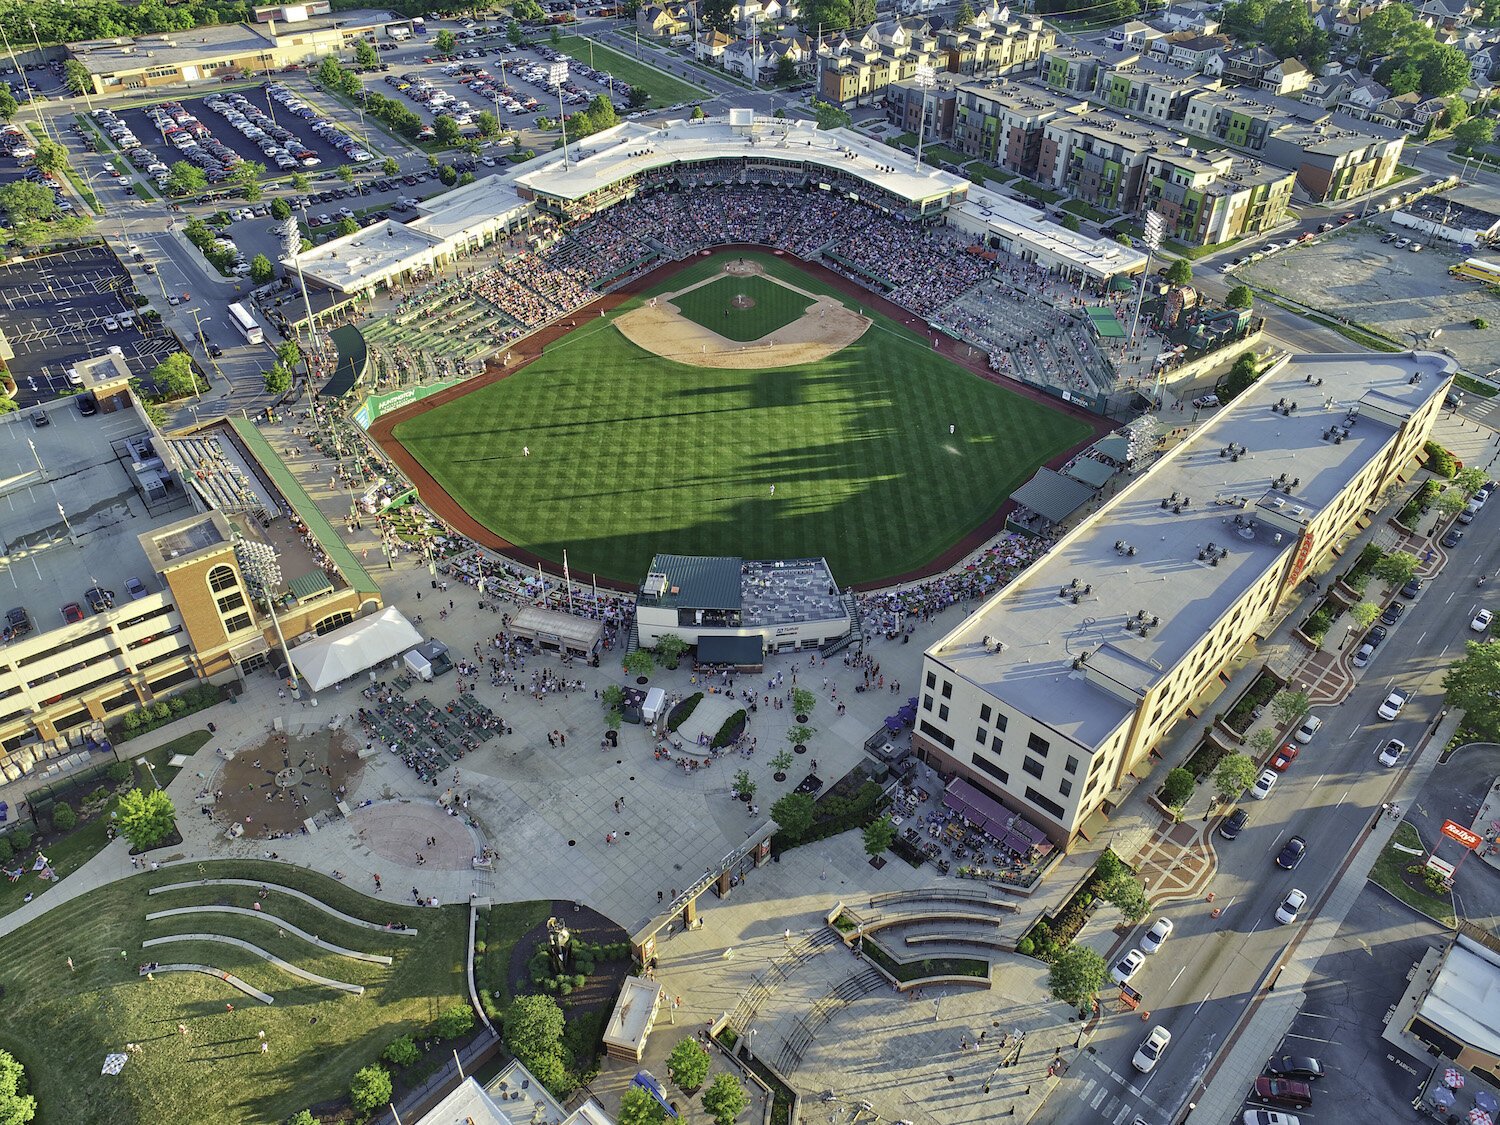 TinCaps games draw thousands of fans to Parkview Field every spring.